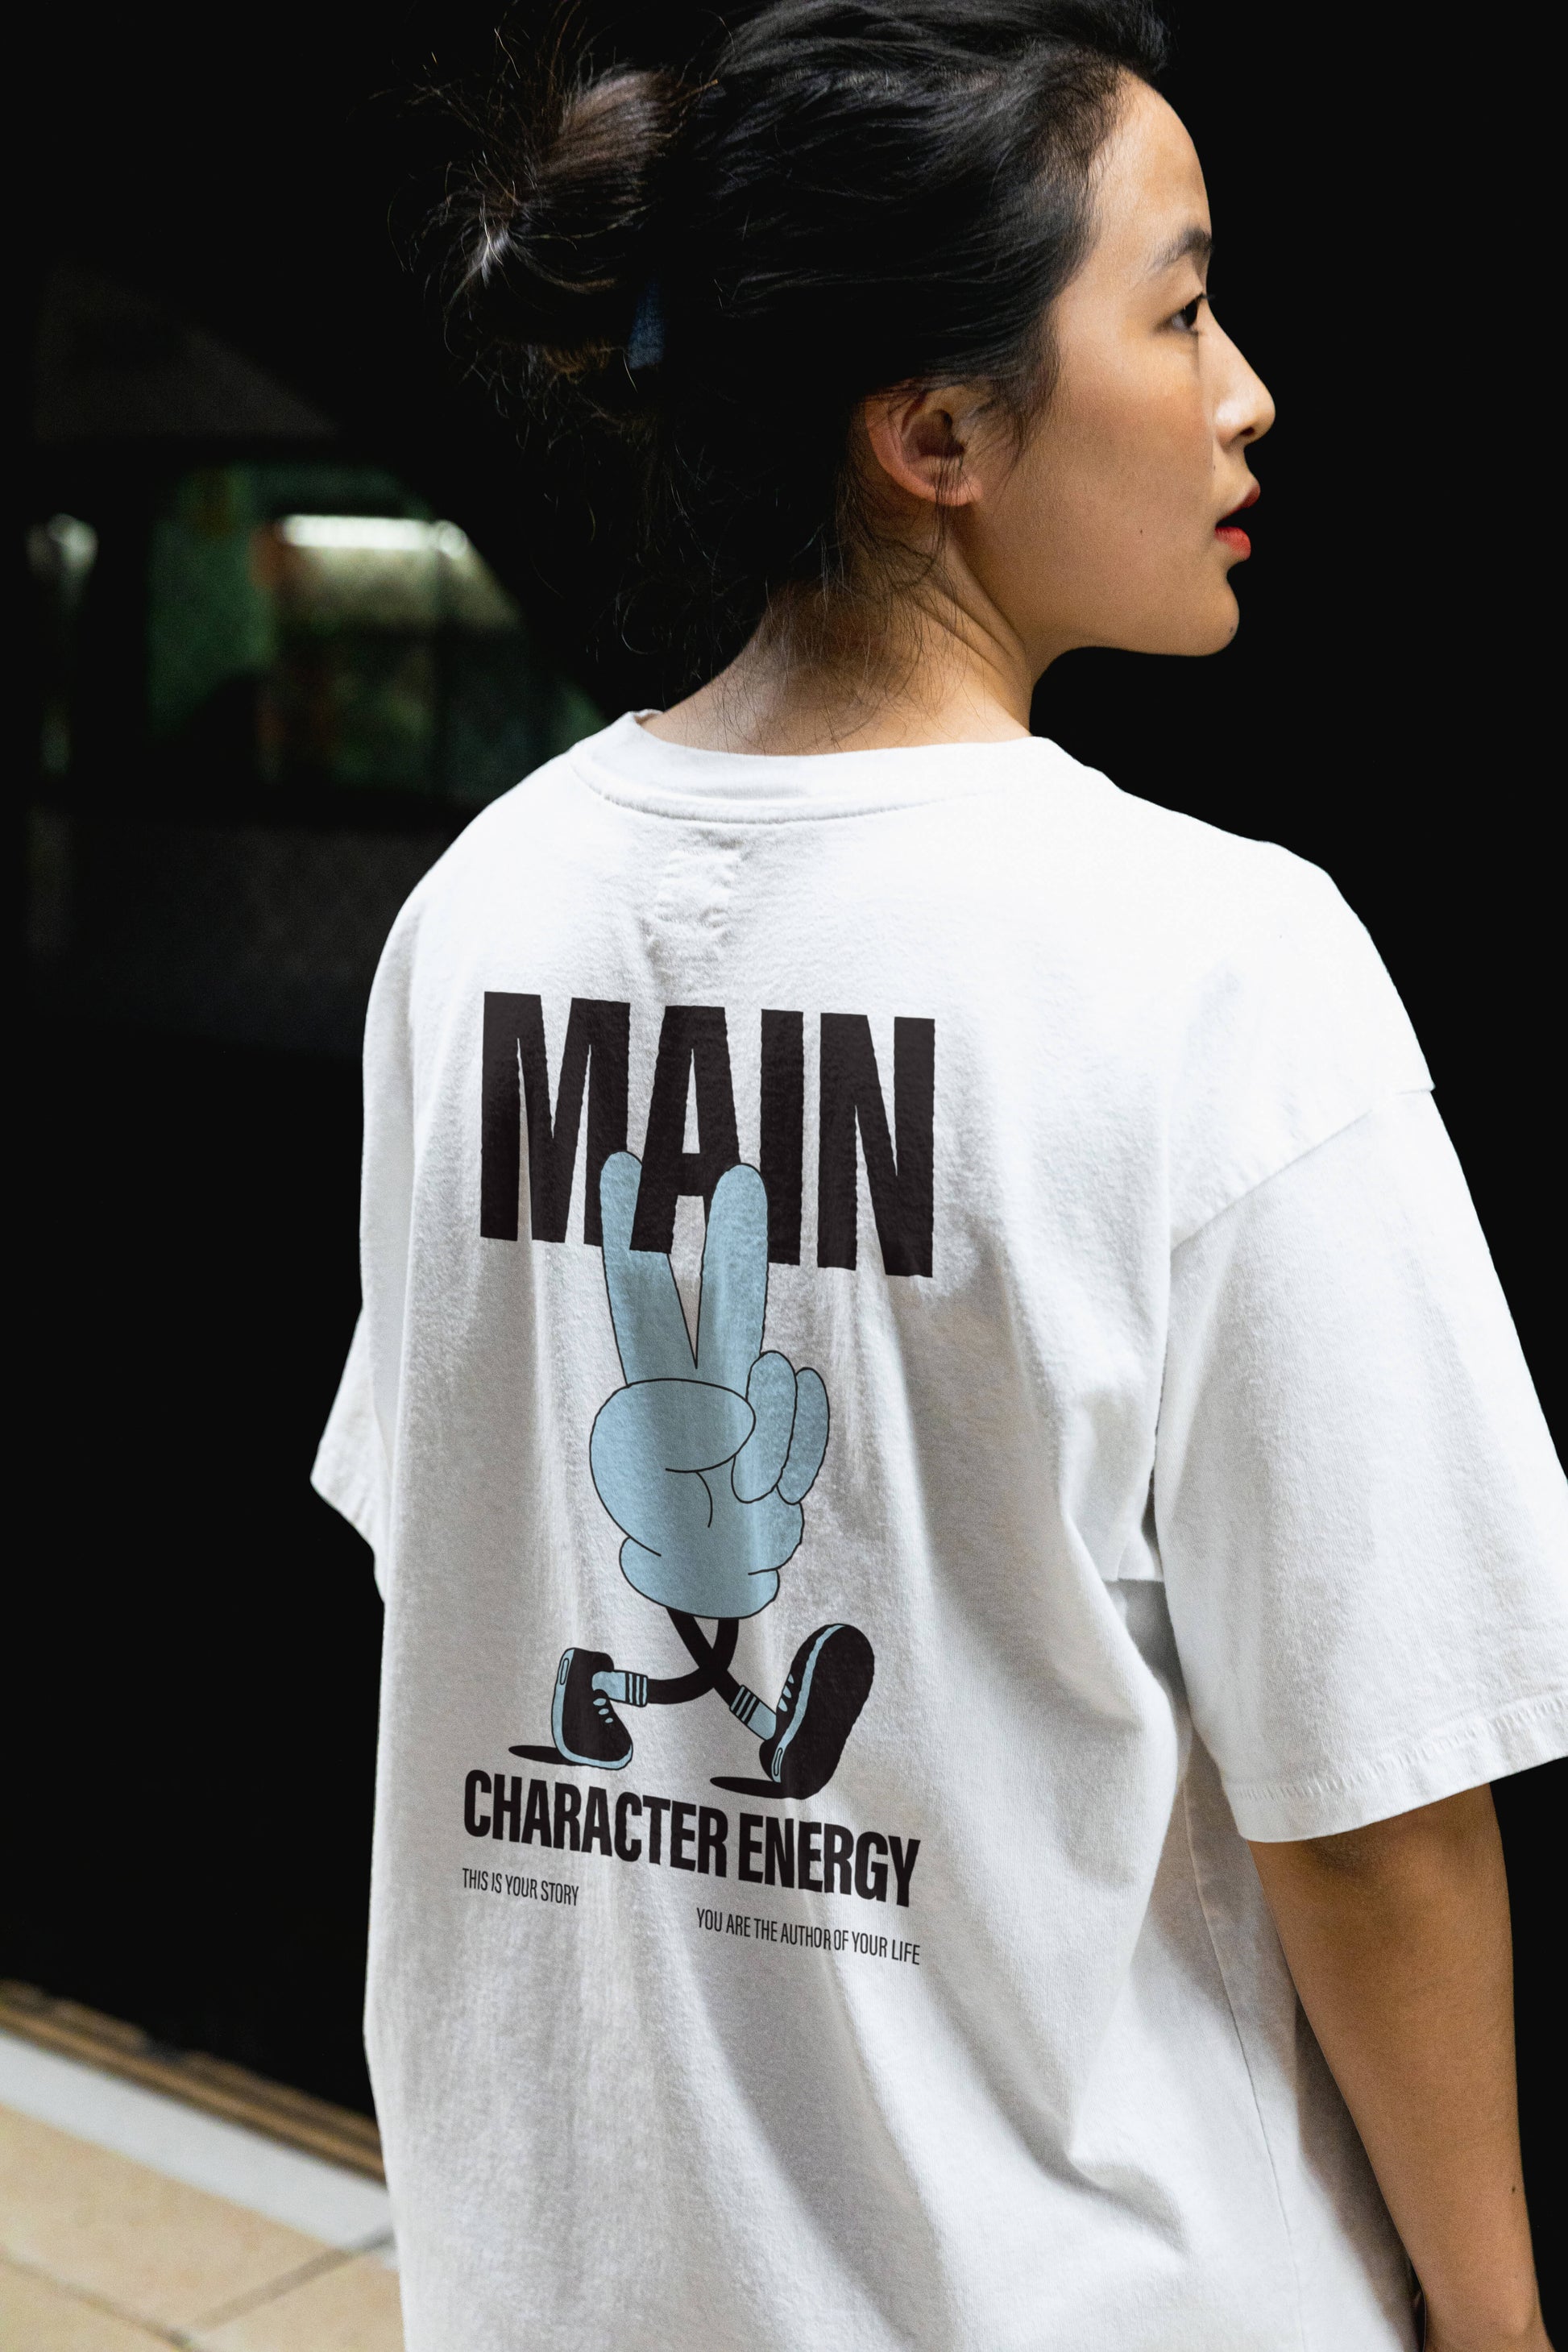 Main character energy tee in blue, energy affirmations